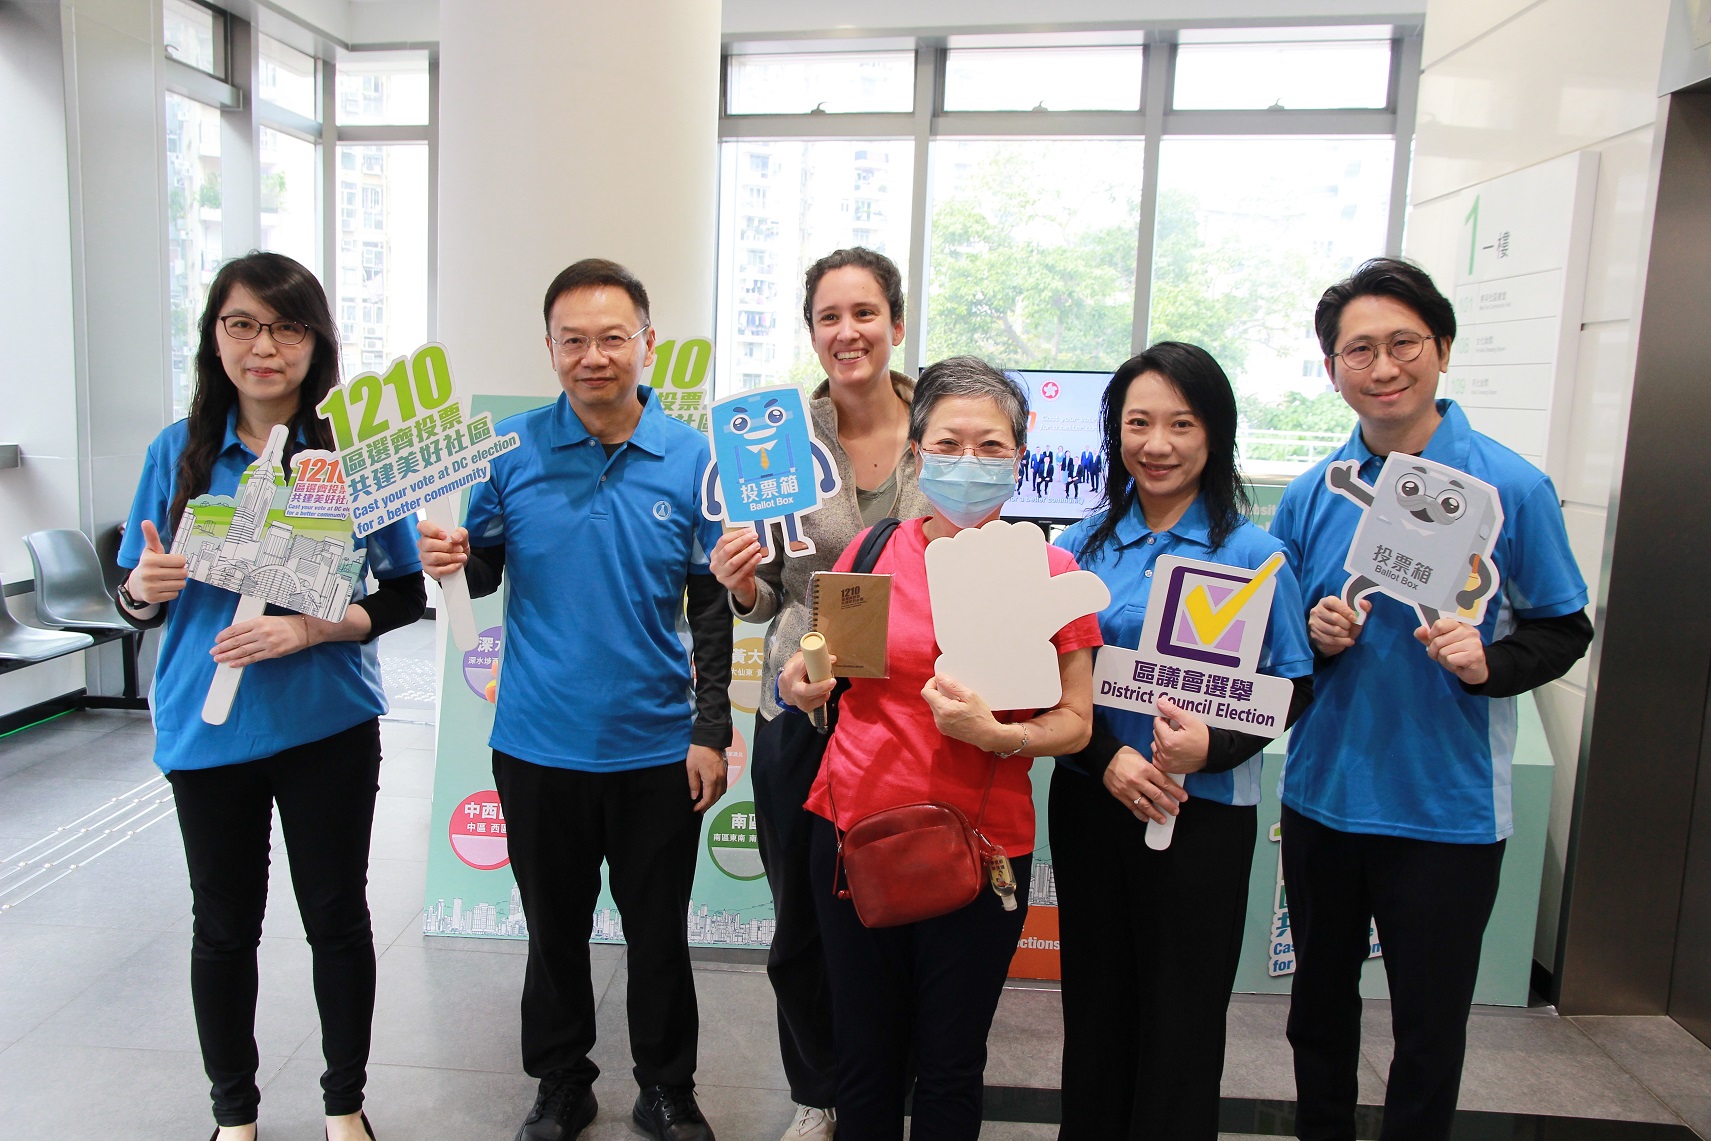 Photo 2: The Government Chemist, Dr LEE Wai-on (second left) taking photos with the public after playing interactive games.